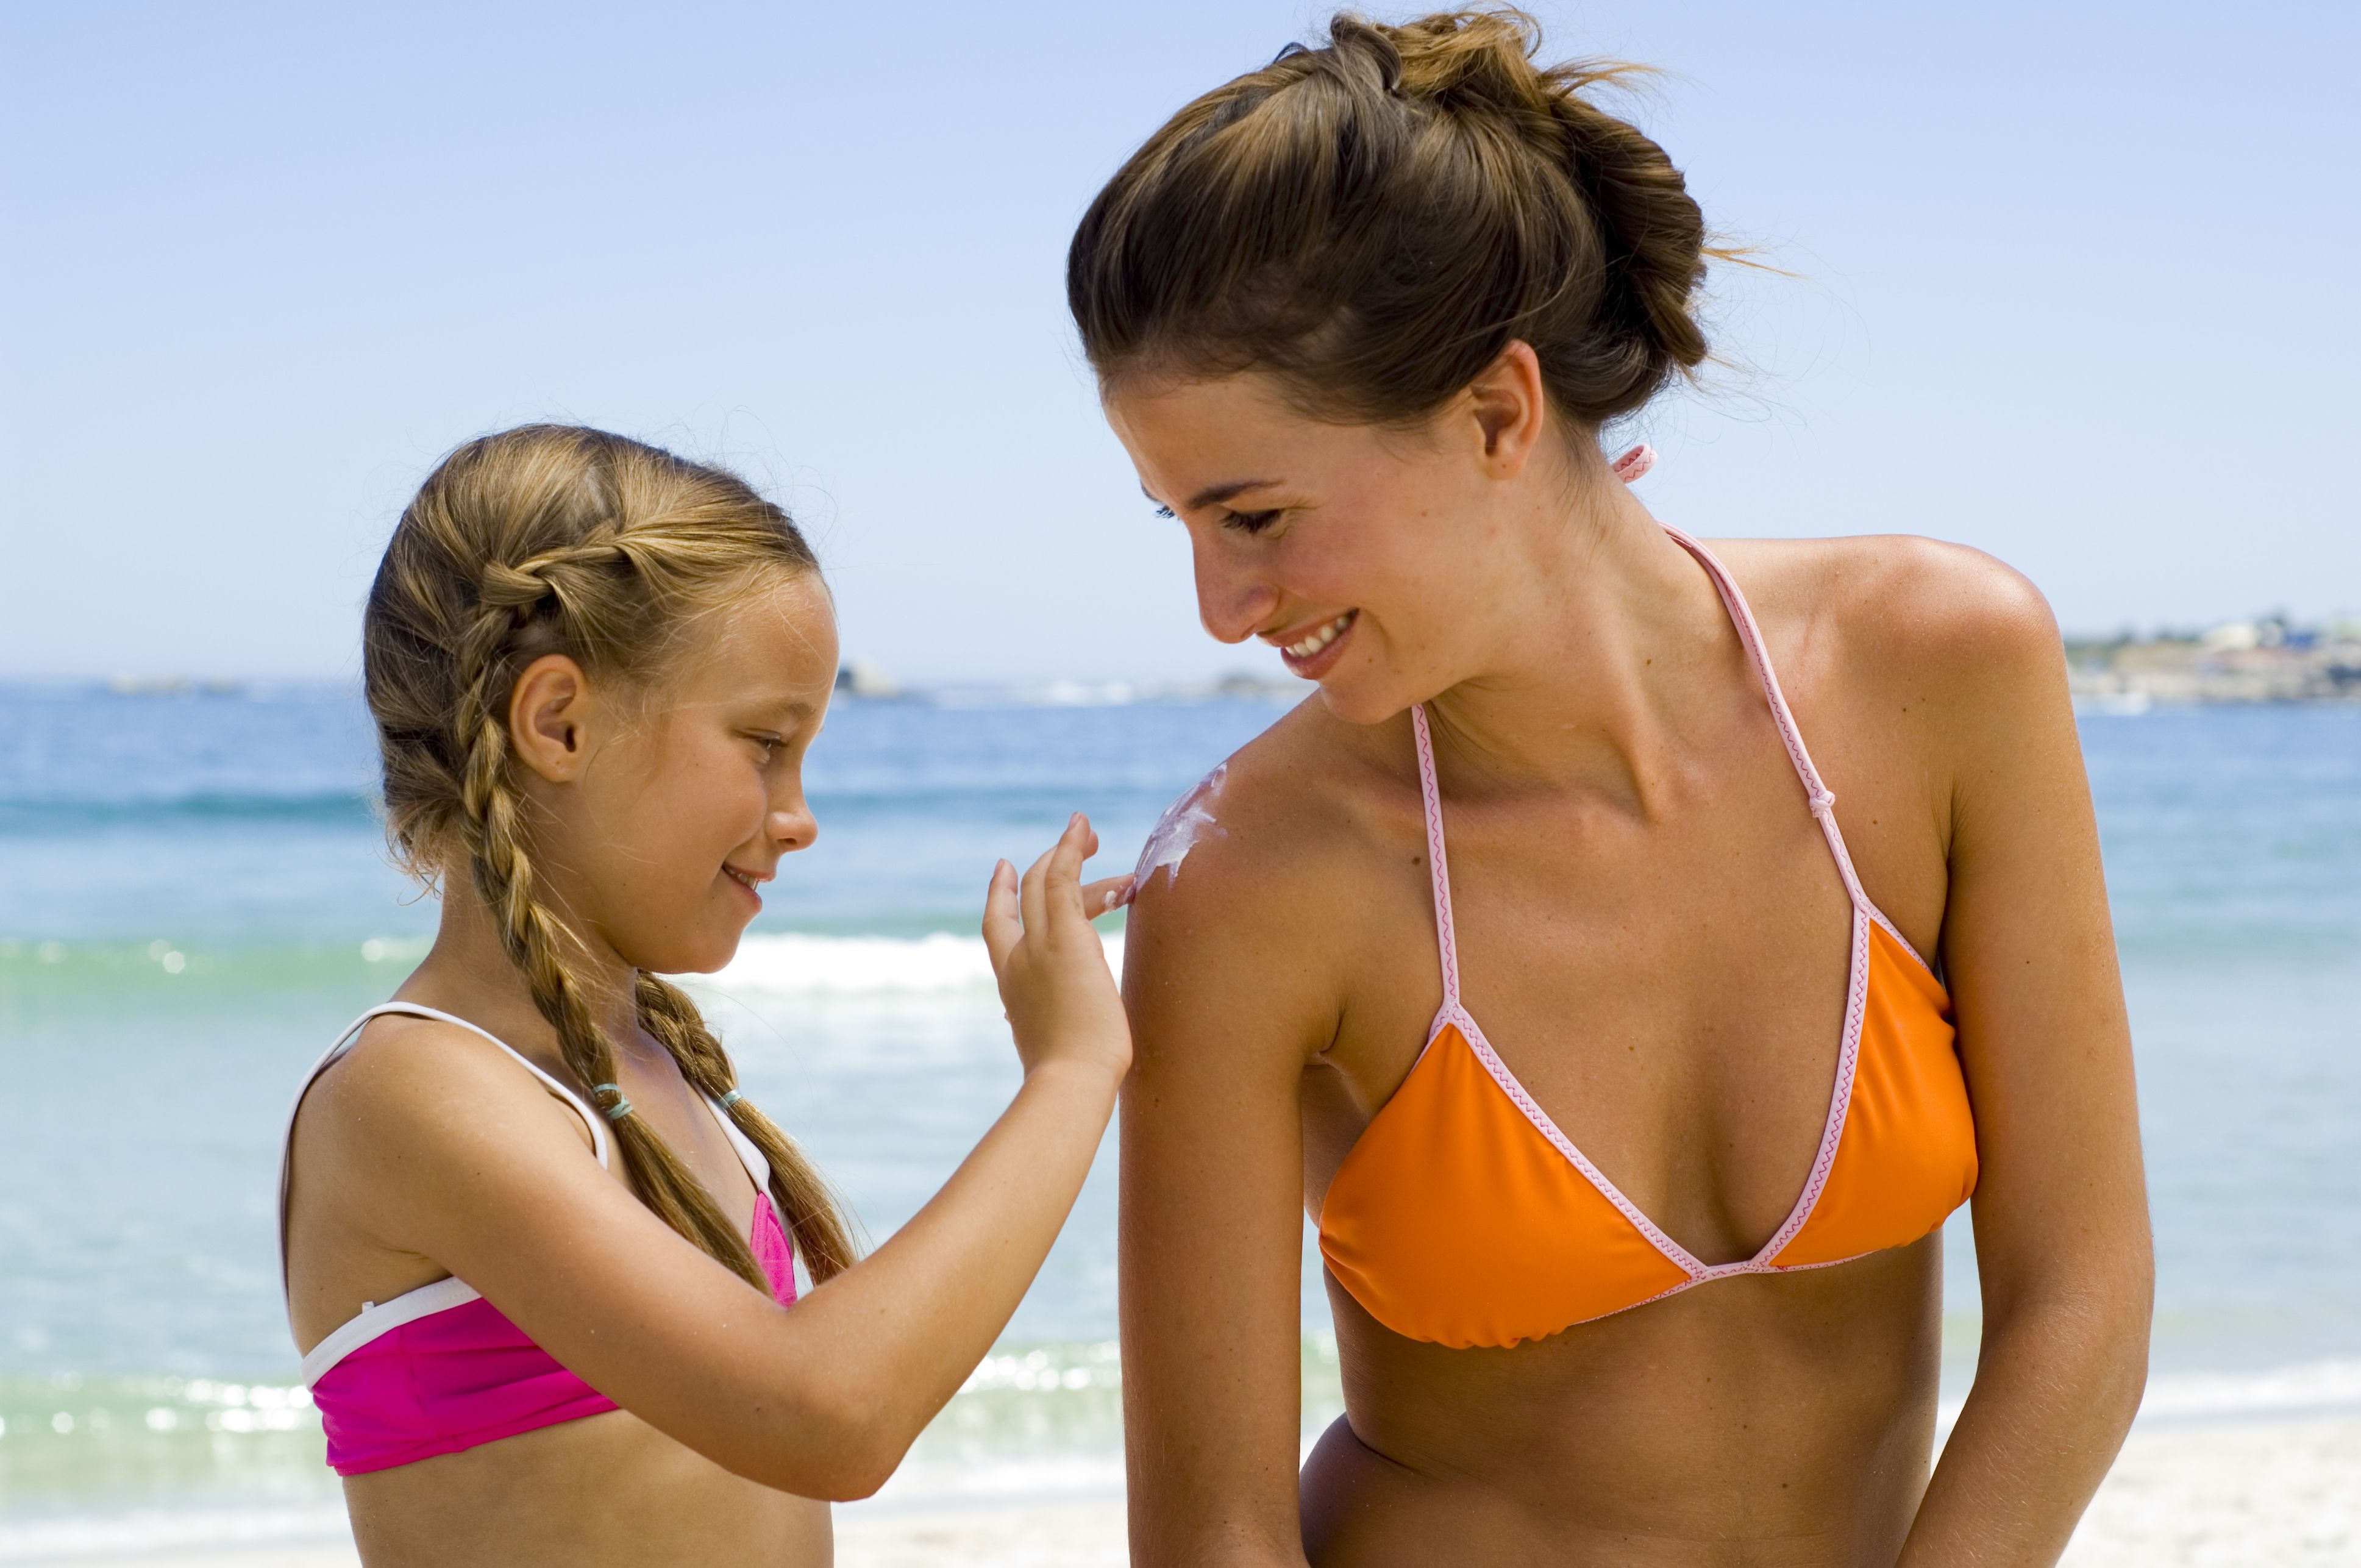 A Dermatologist's Guide to Sun Protection and Sunscreen for Summer